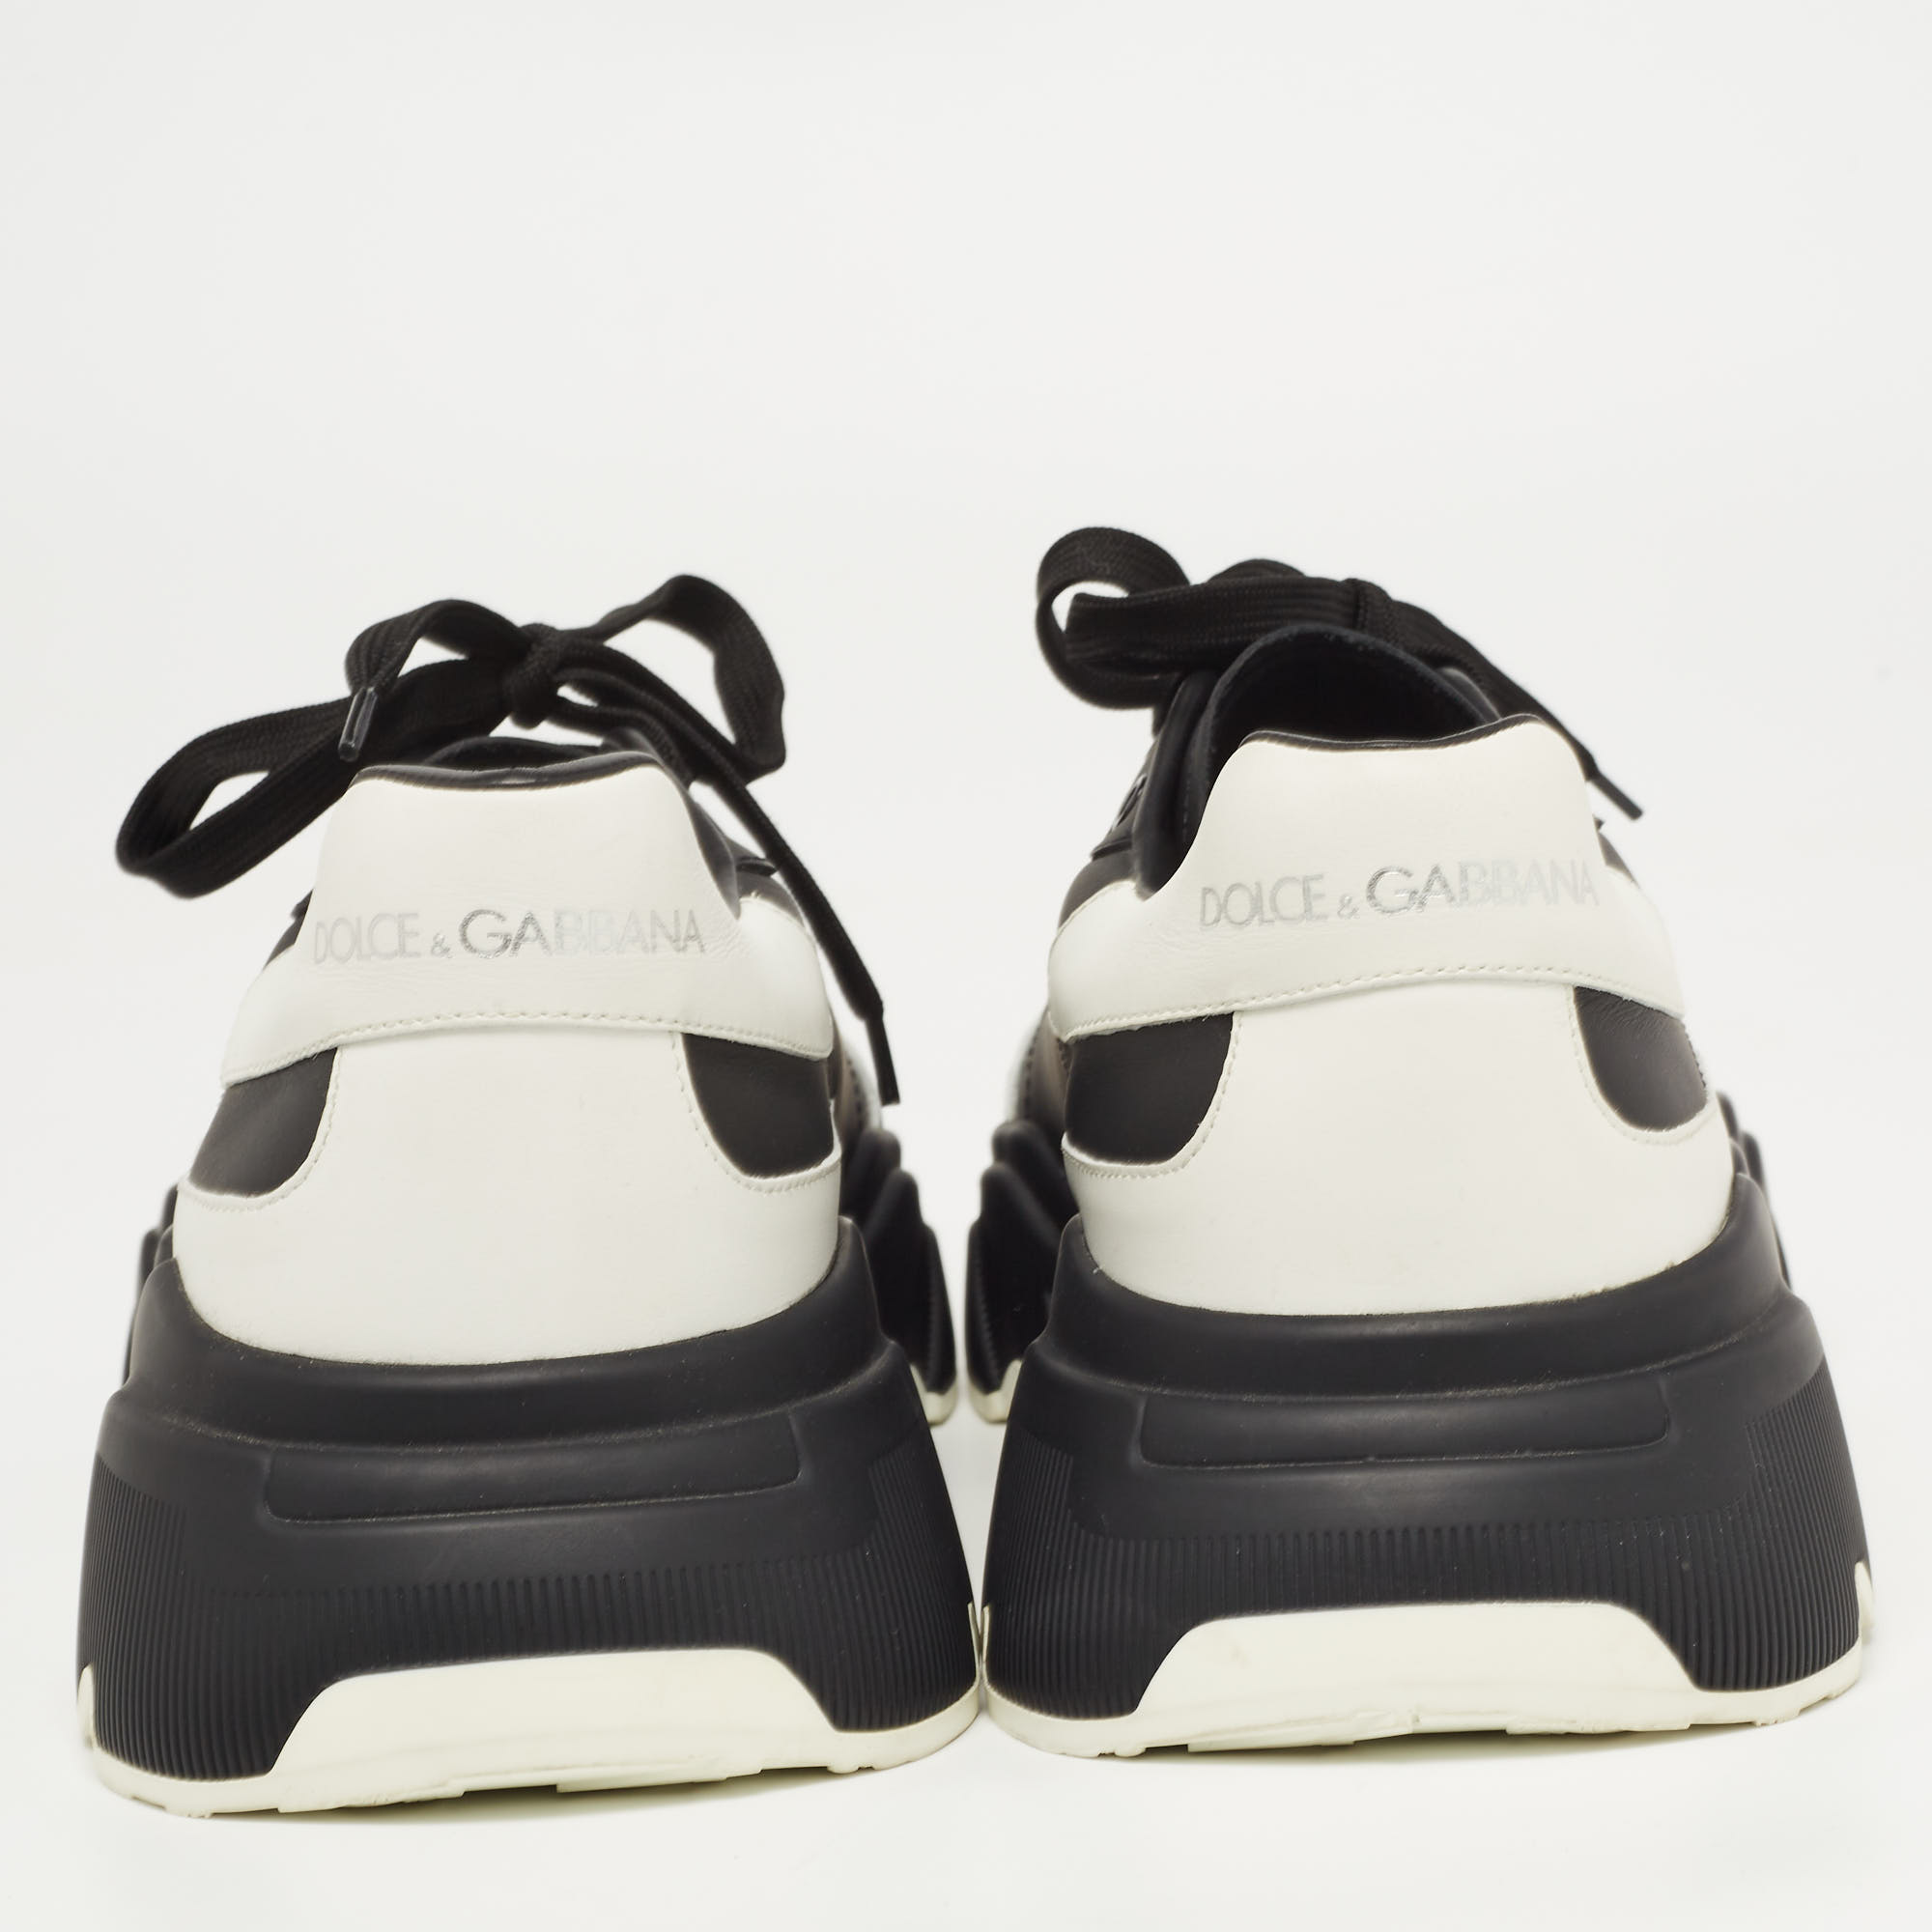 Dolce & Gabbana Black/White Leather Daymaster Sneakers Size 46